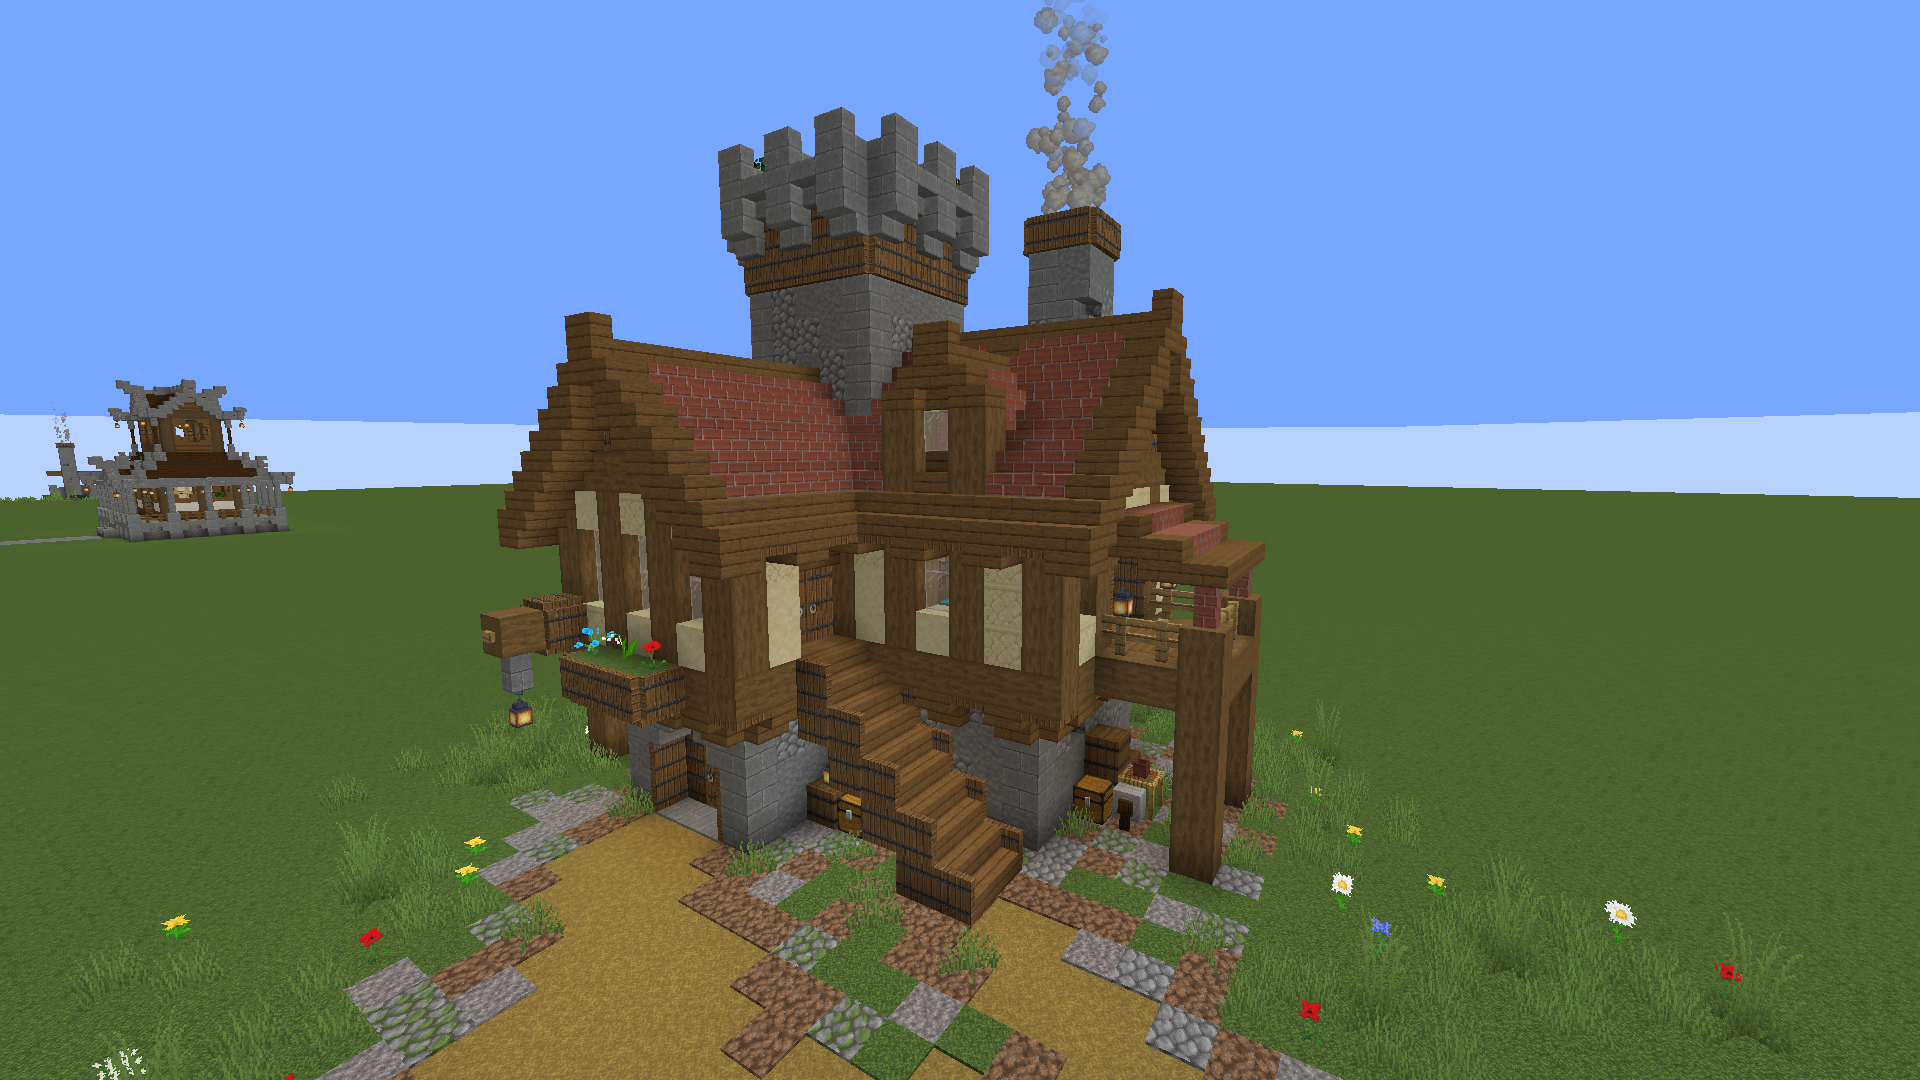 Minecract Medieval Style House with interior schematic (litematic)